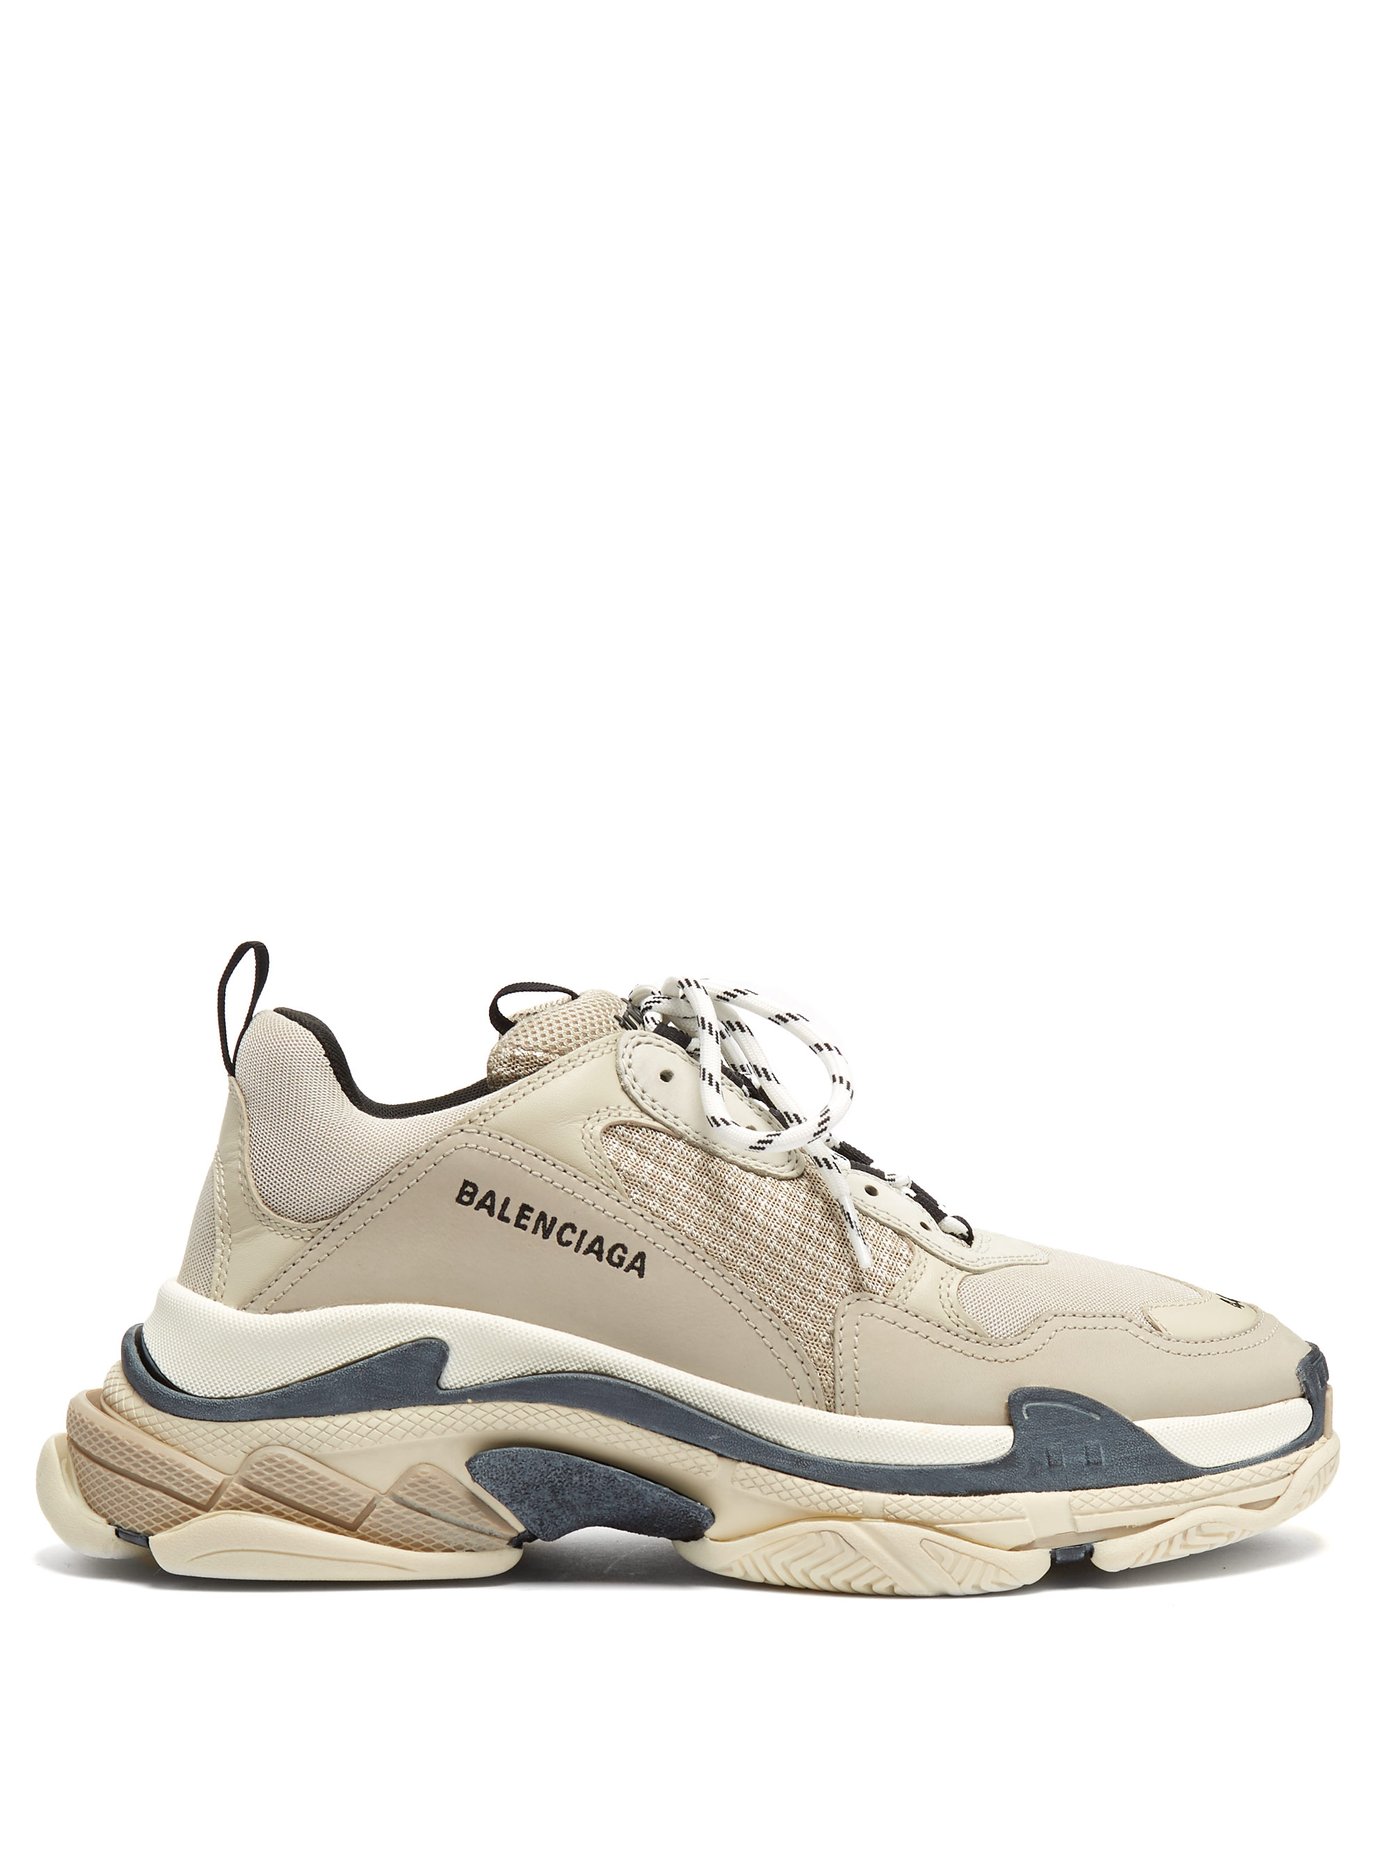 Balenciaga Triple S Runner Suede And Mesh Trainers in